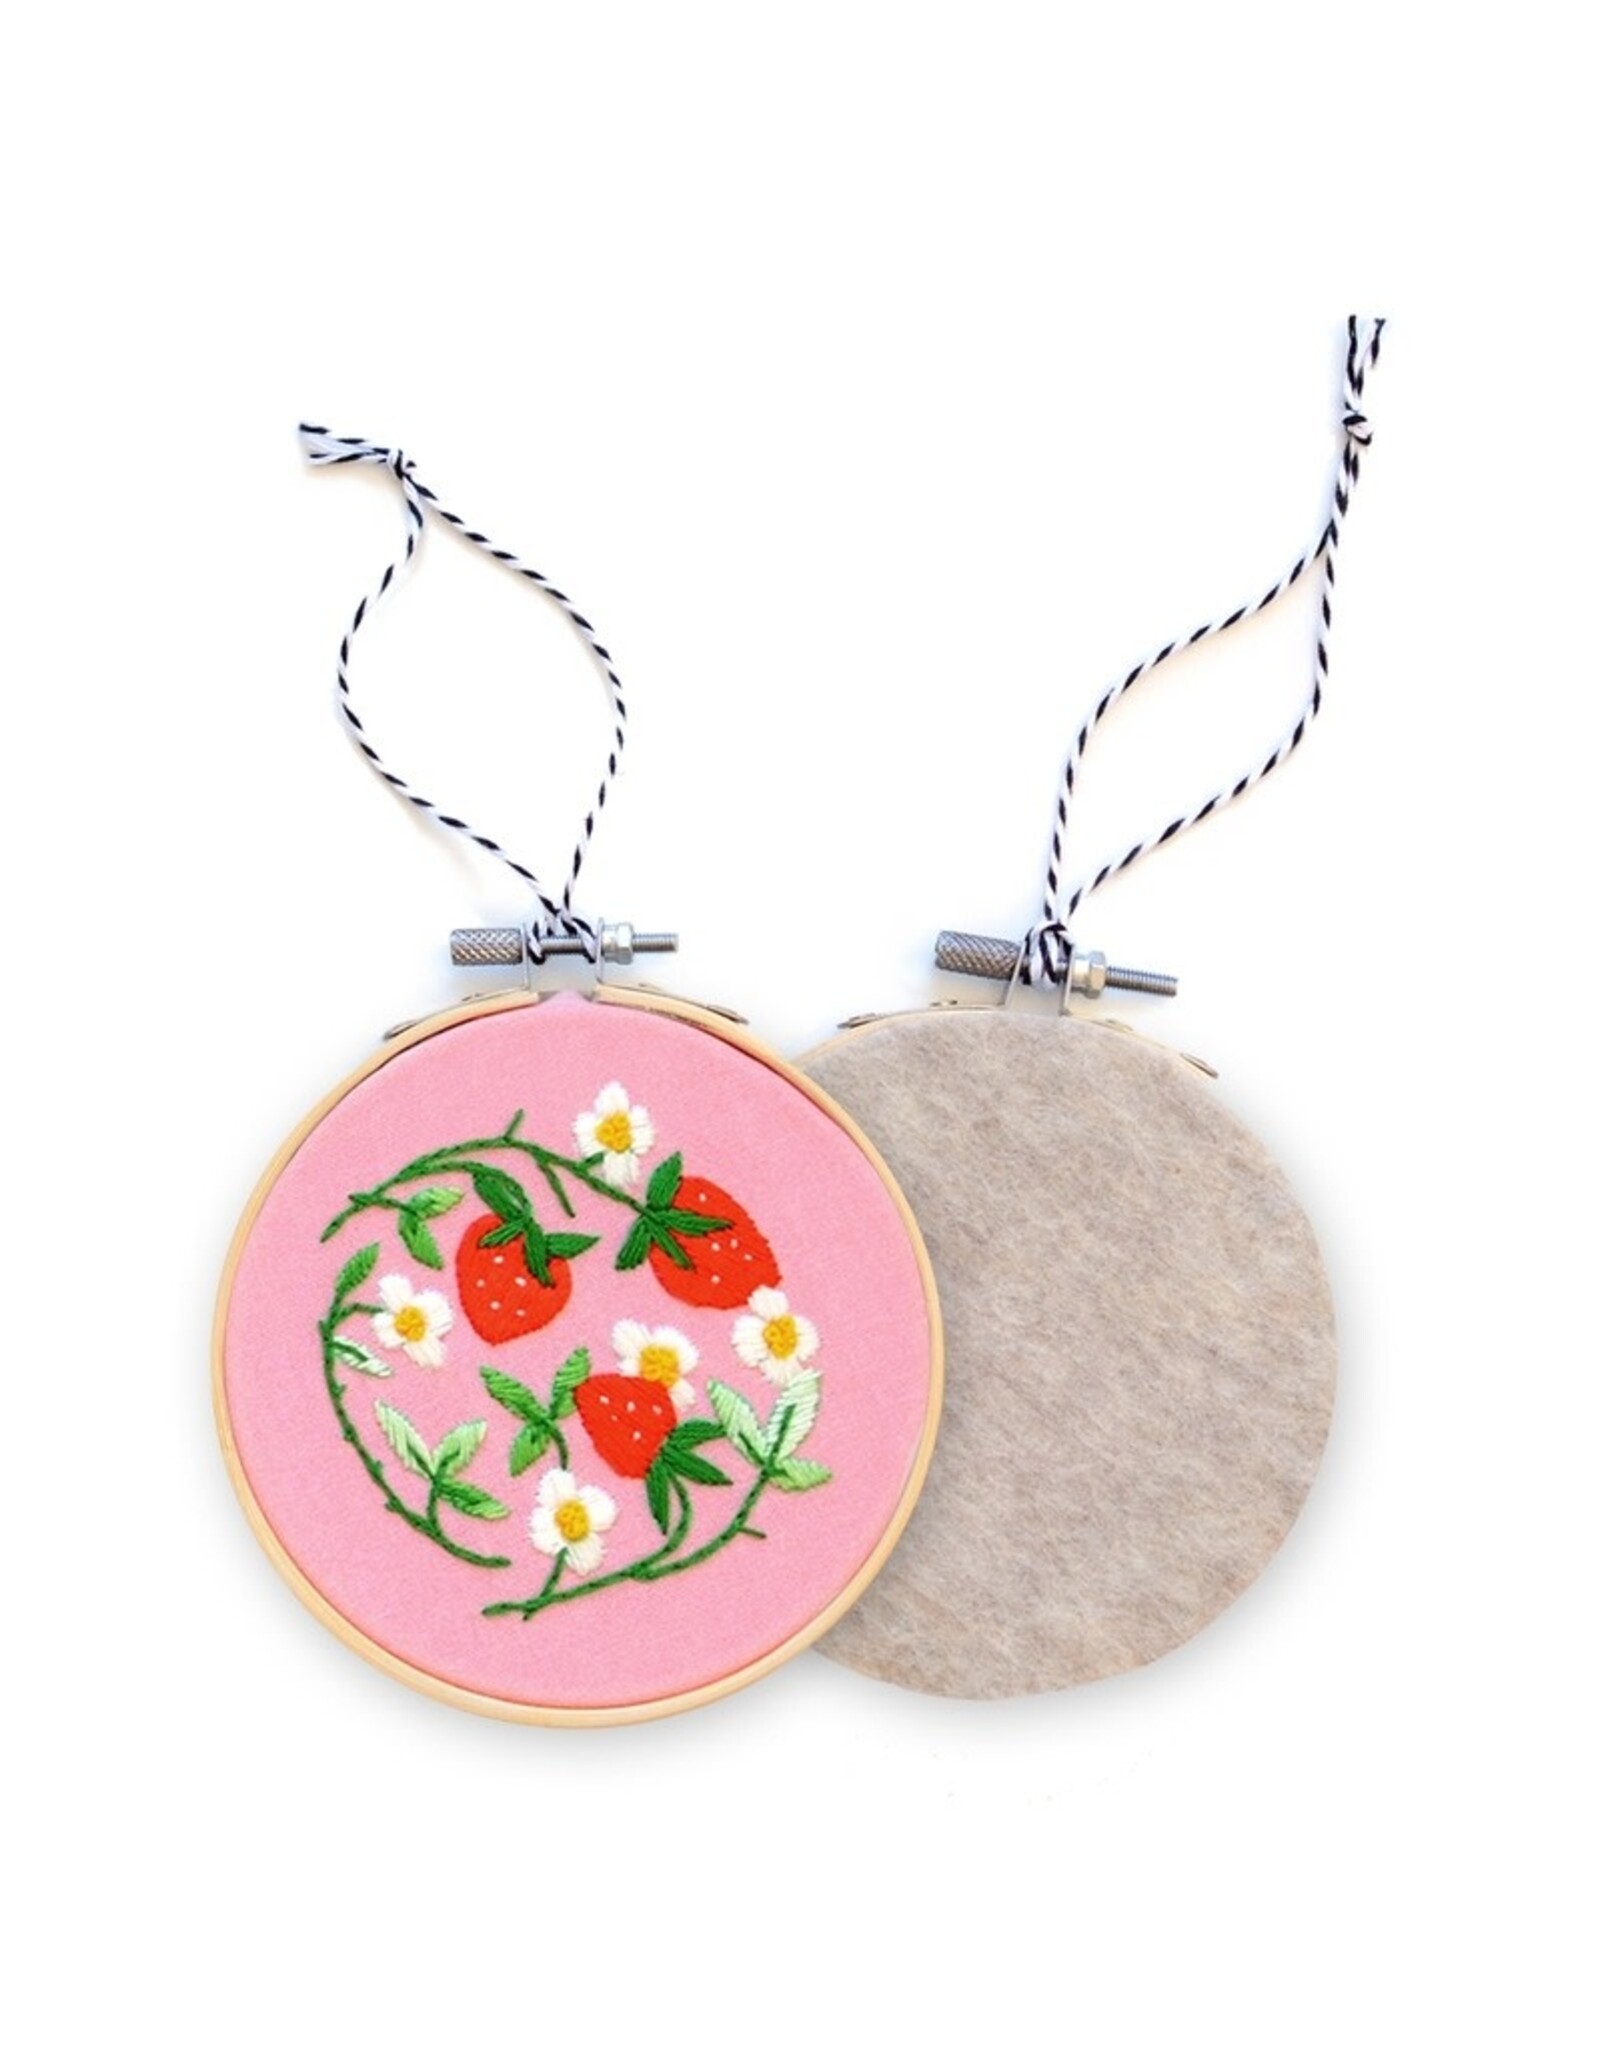 Antiquaria Strawberries DIY Embroidered Ornament Kit